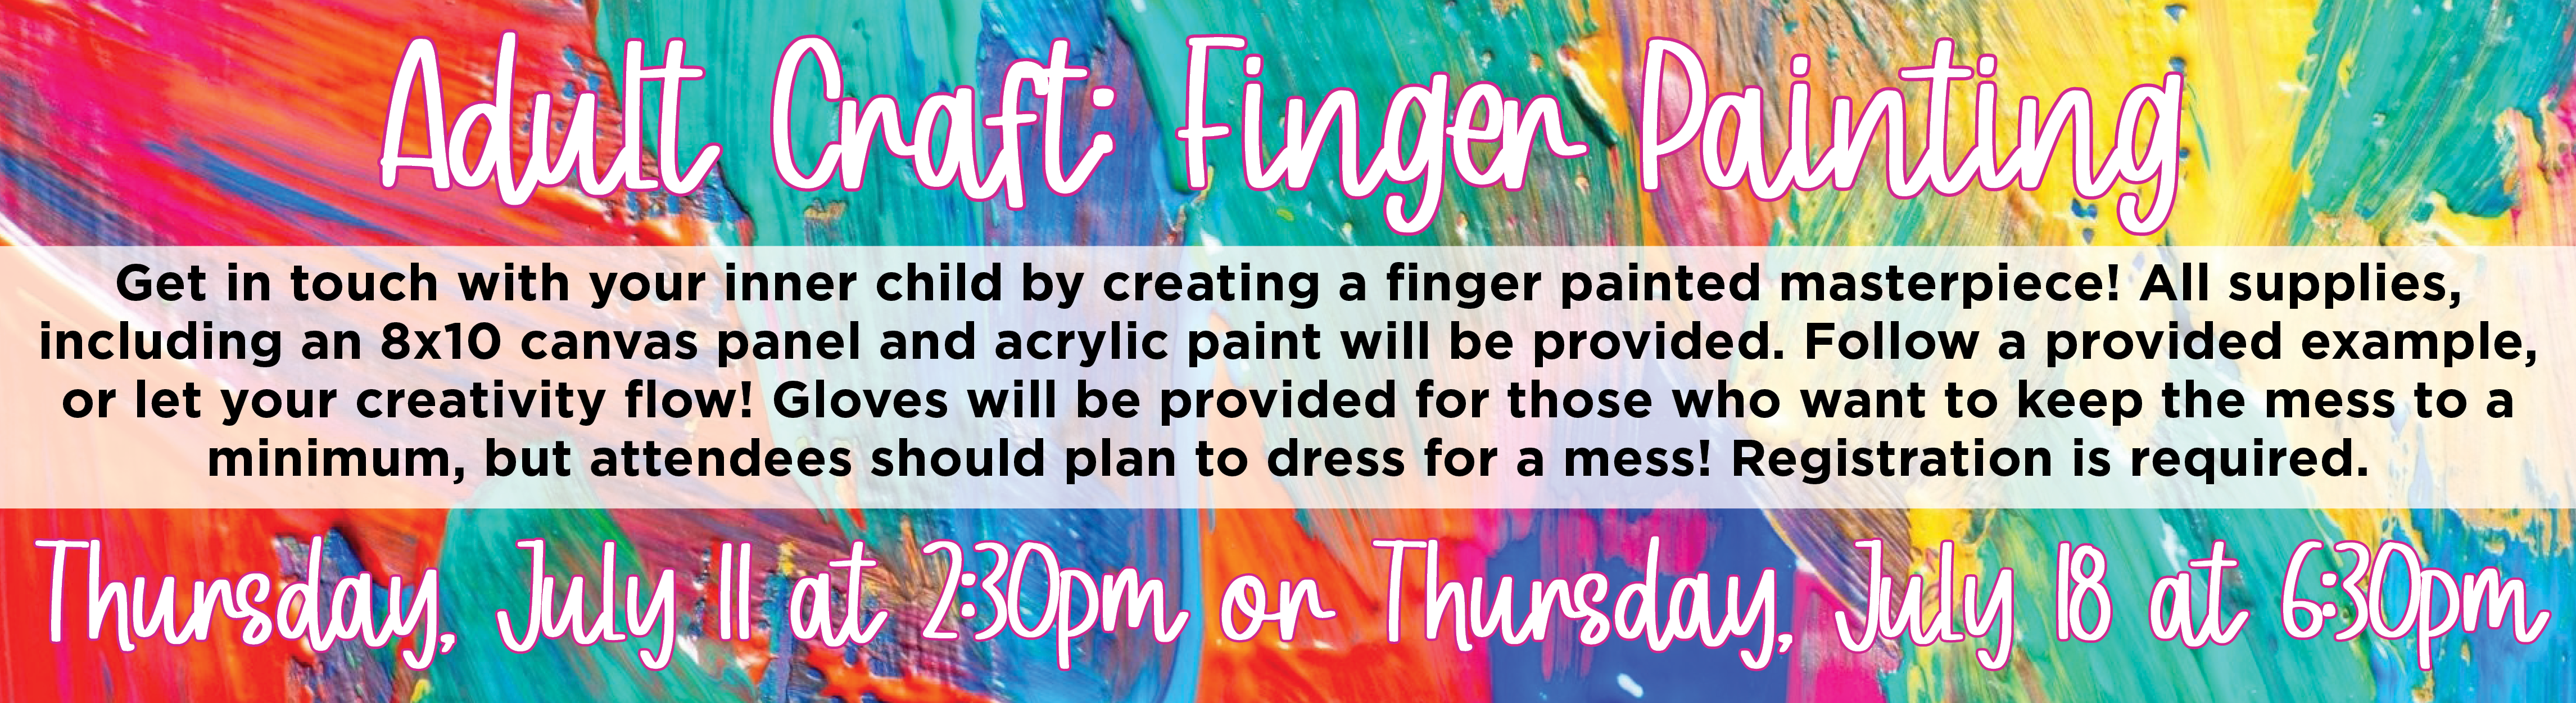 Adult Craft- Finger Painting